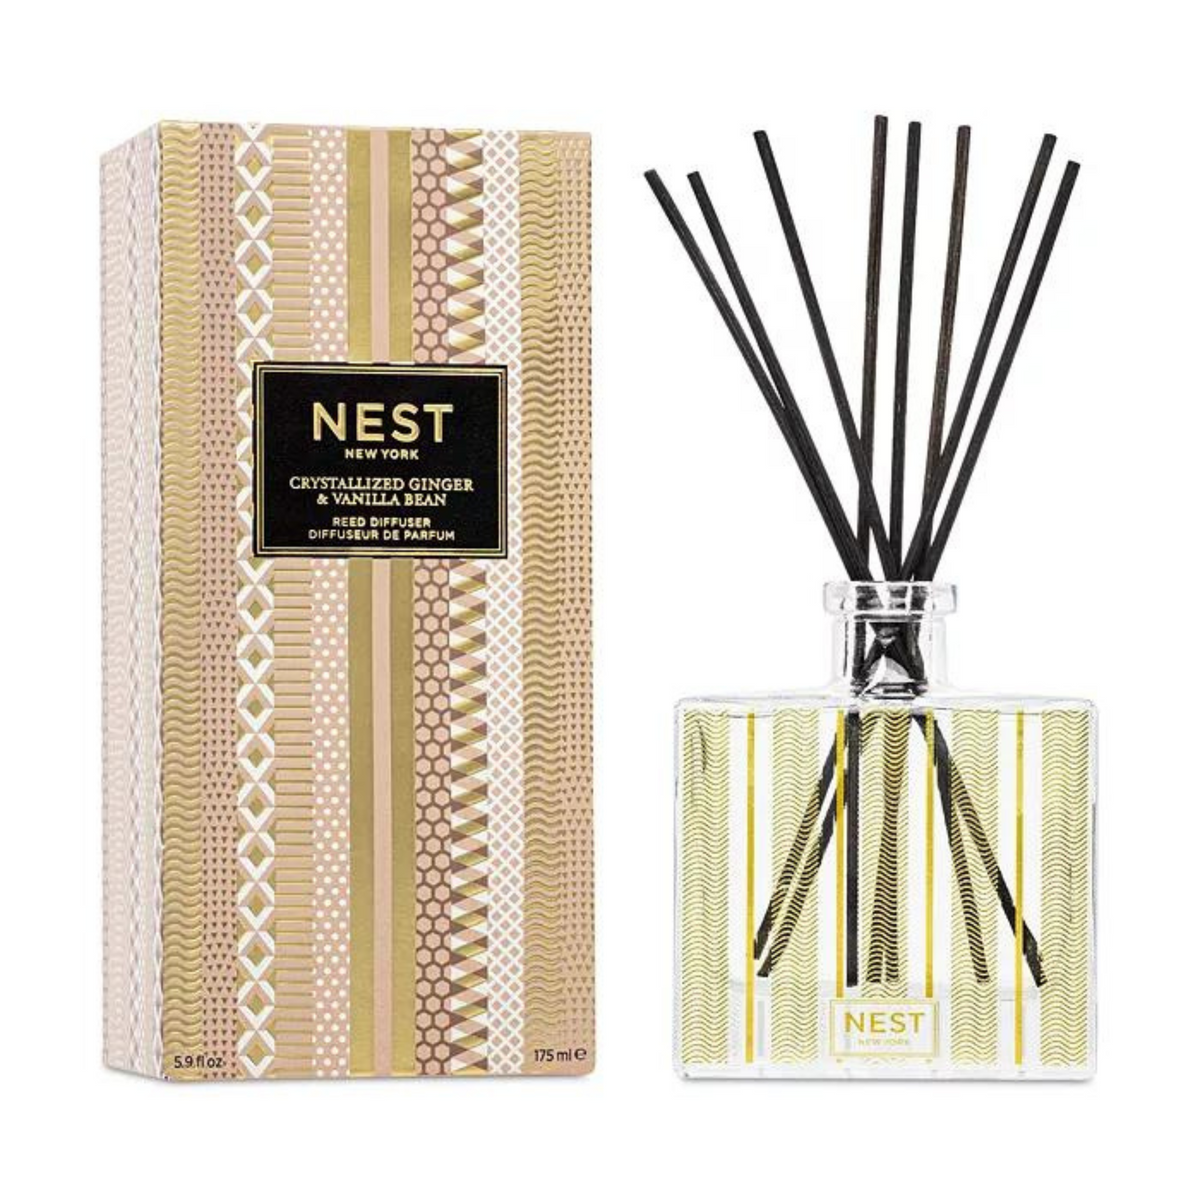 Primary Image of Nest Fragrances Crystallized Ginger & Vanilla Bean Reed Diffuser (5.9 oz)